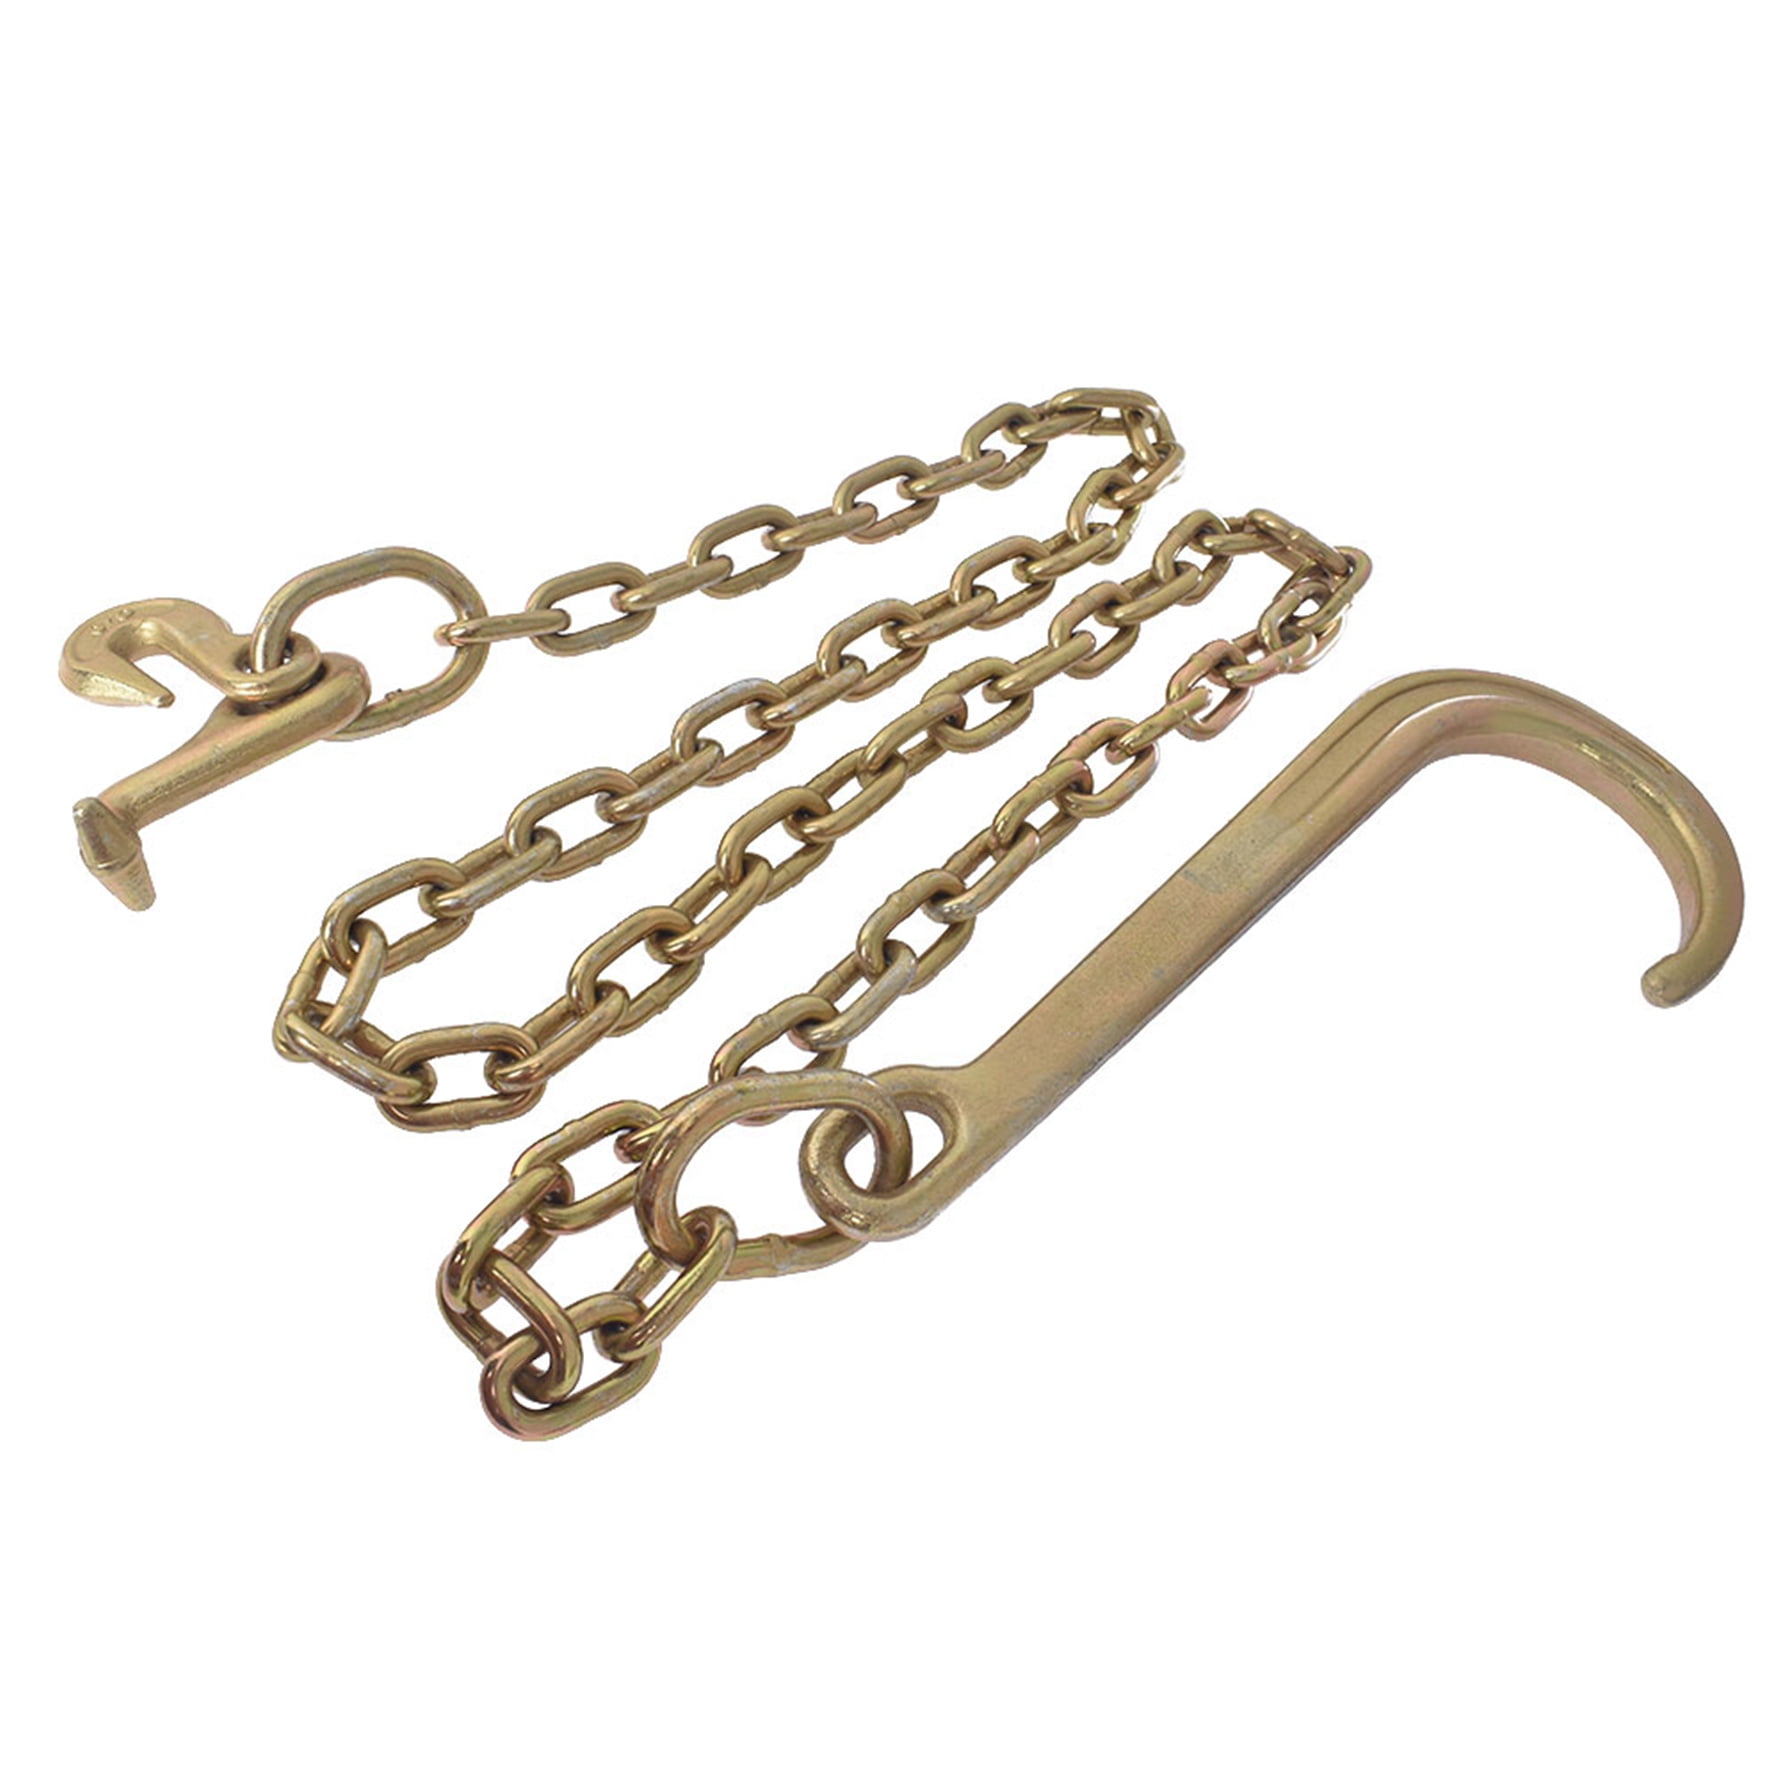 Labwork 5/16 x 6 ft Grade 70 Tow Chain 15 J Hook and T Hook Mini J Hook Recovery Wrecker Axle Tow Truck Chain